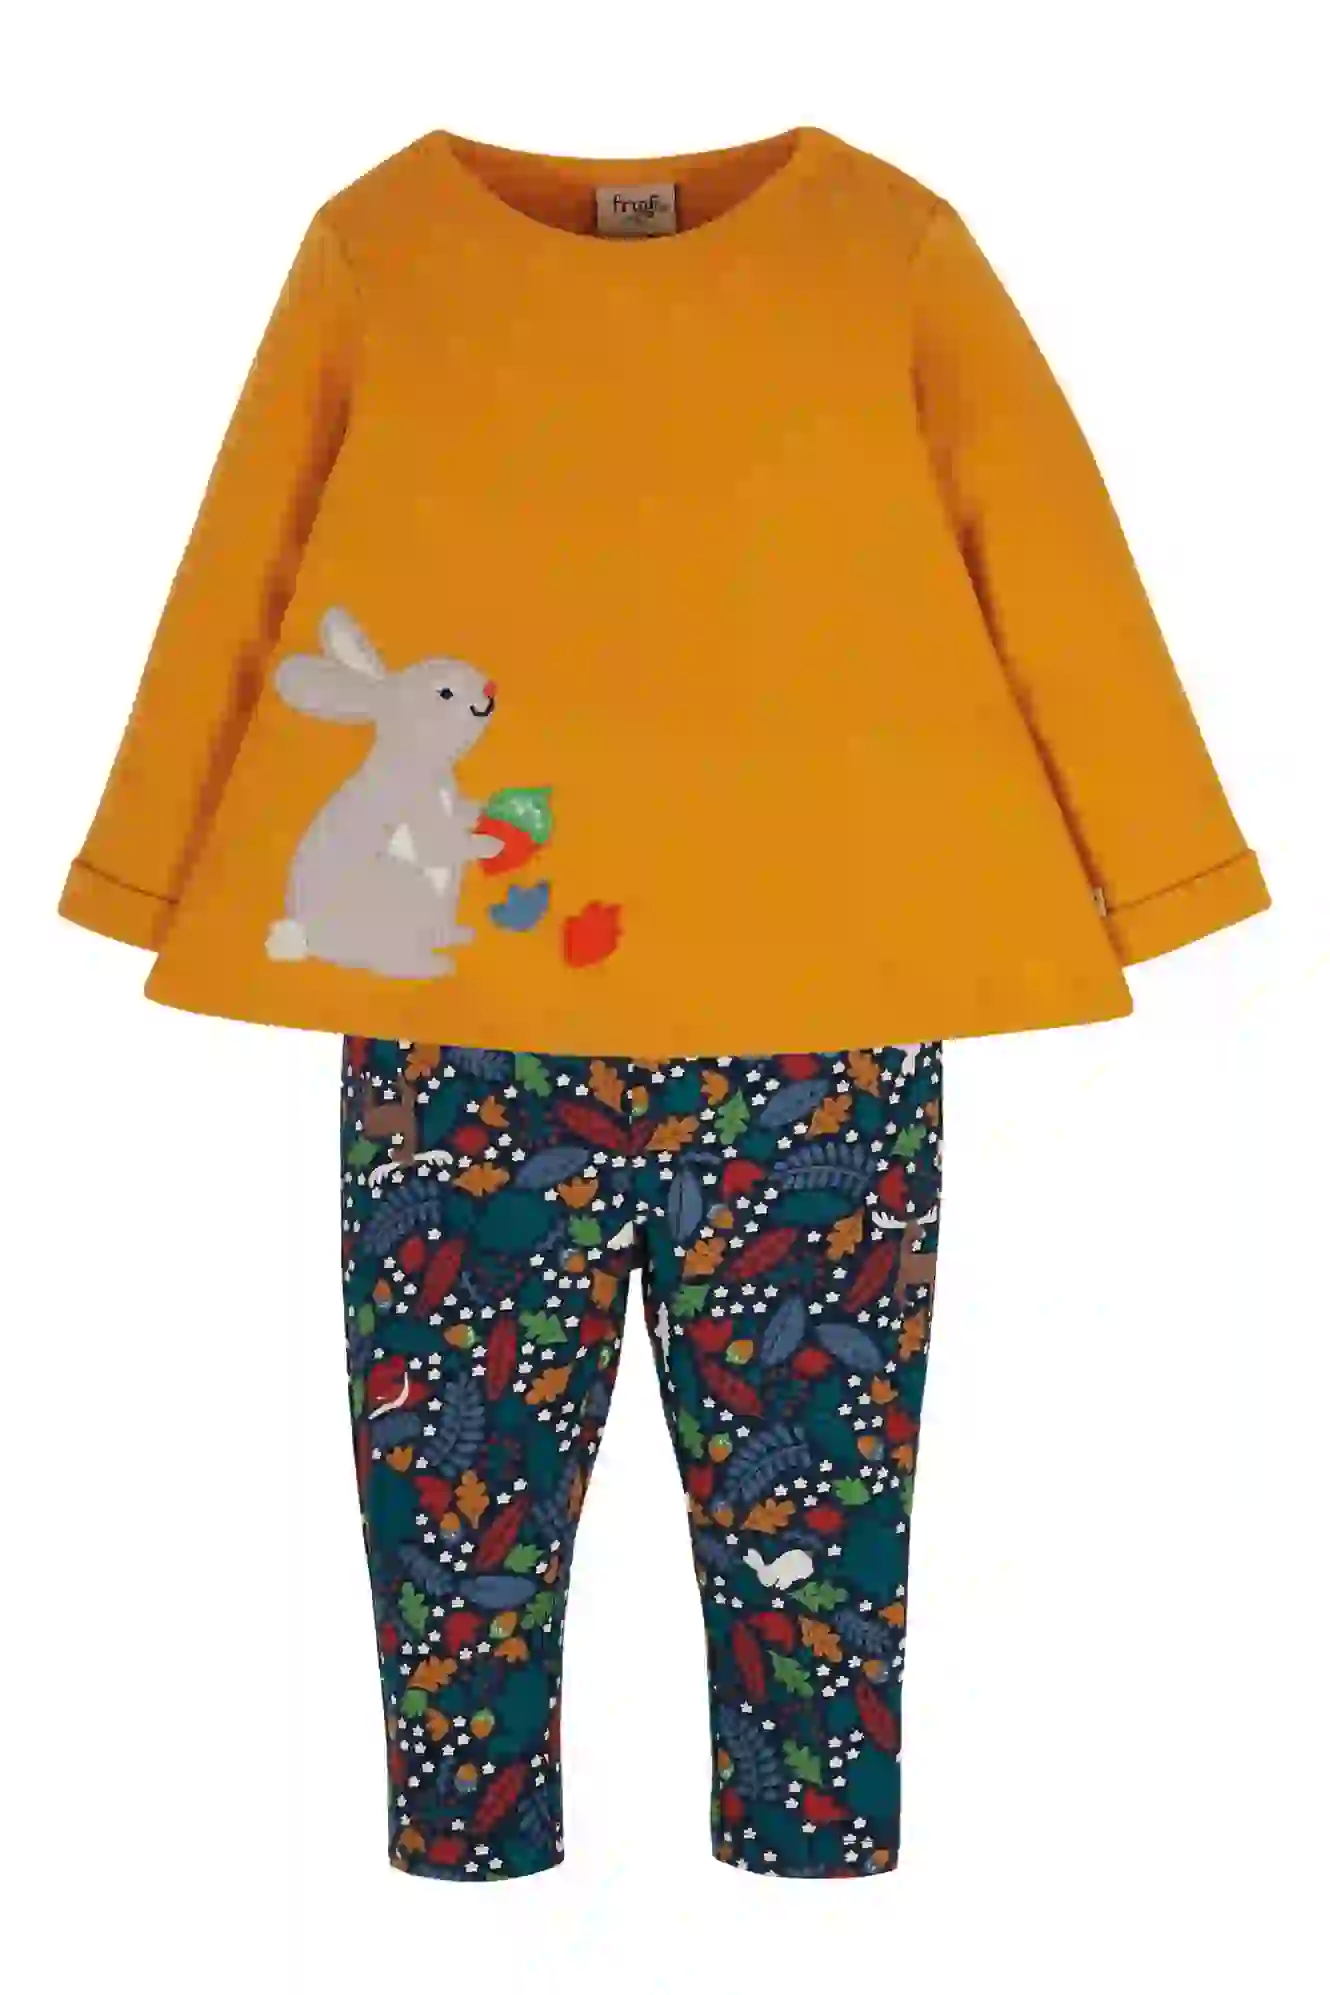 Set - Frugi - Oralie - 2 pc outfit - top and leggings -sale